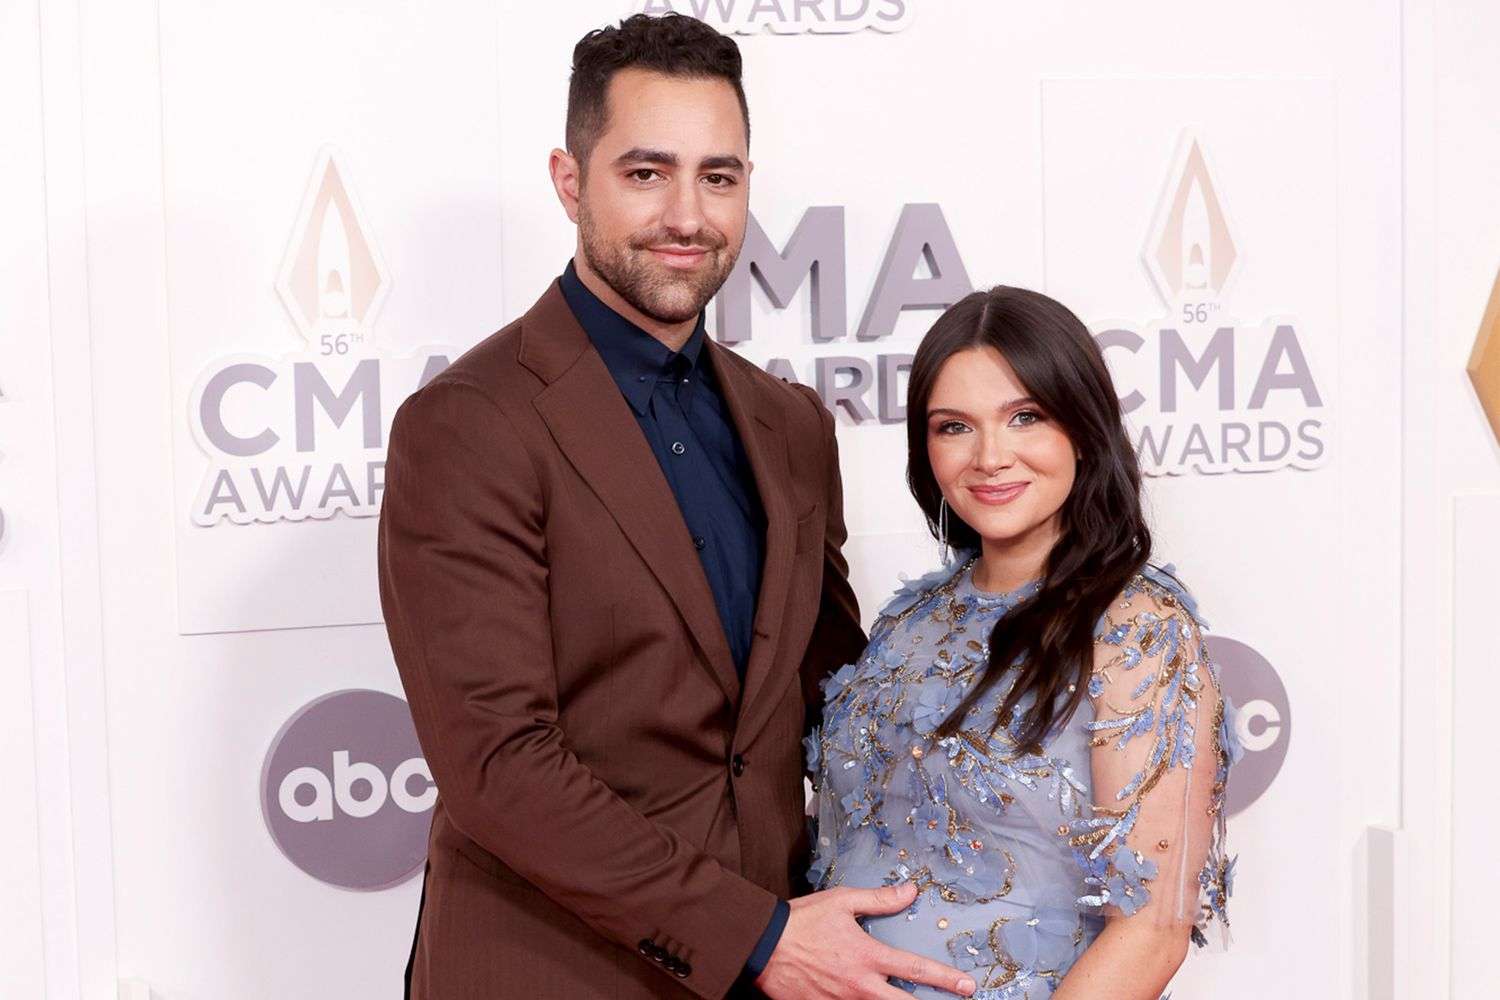 Surprise! At the CMA Awards, Katie Stevens of The Bold Type and her husband Paul DiGiovanni announce their pregnancy.